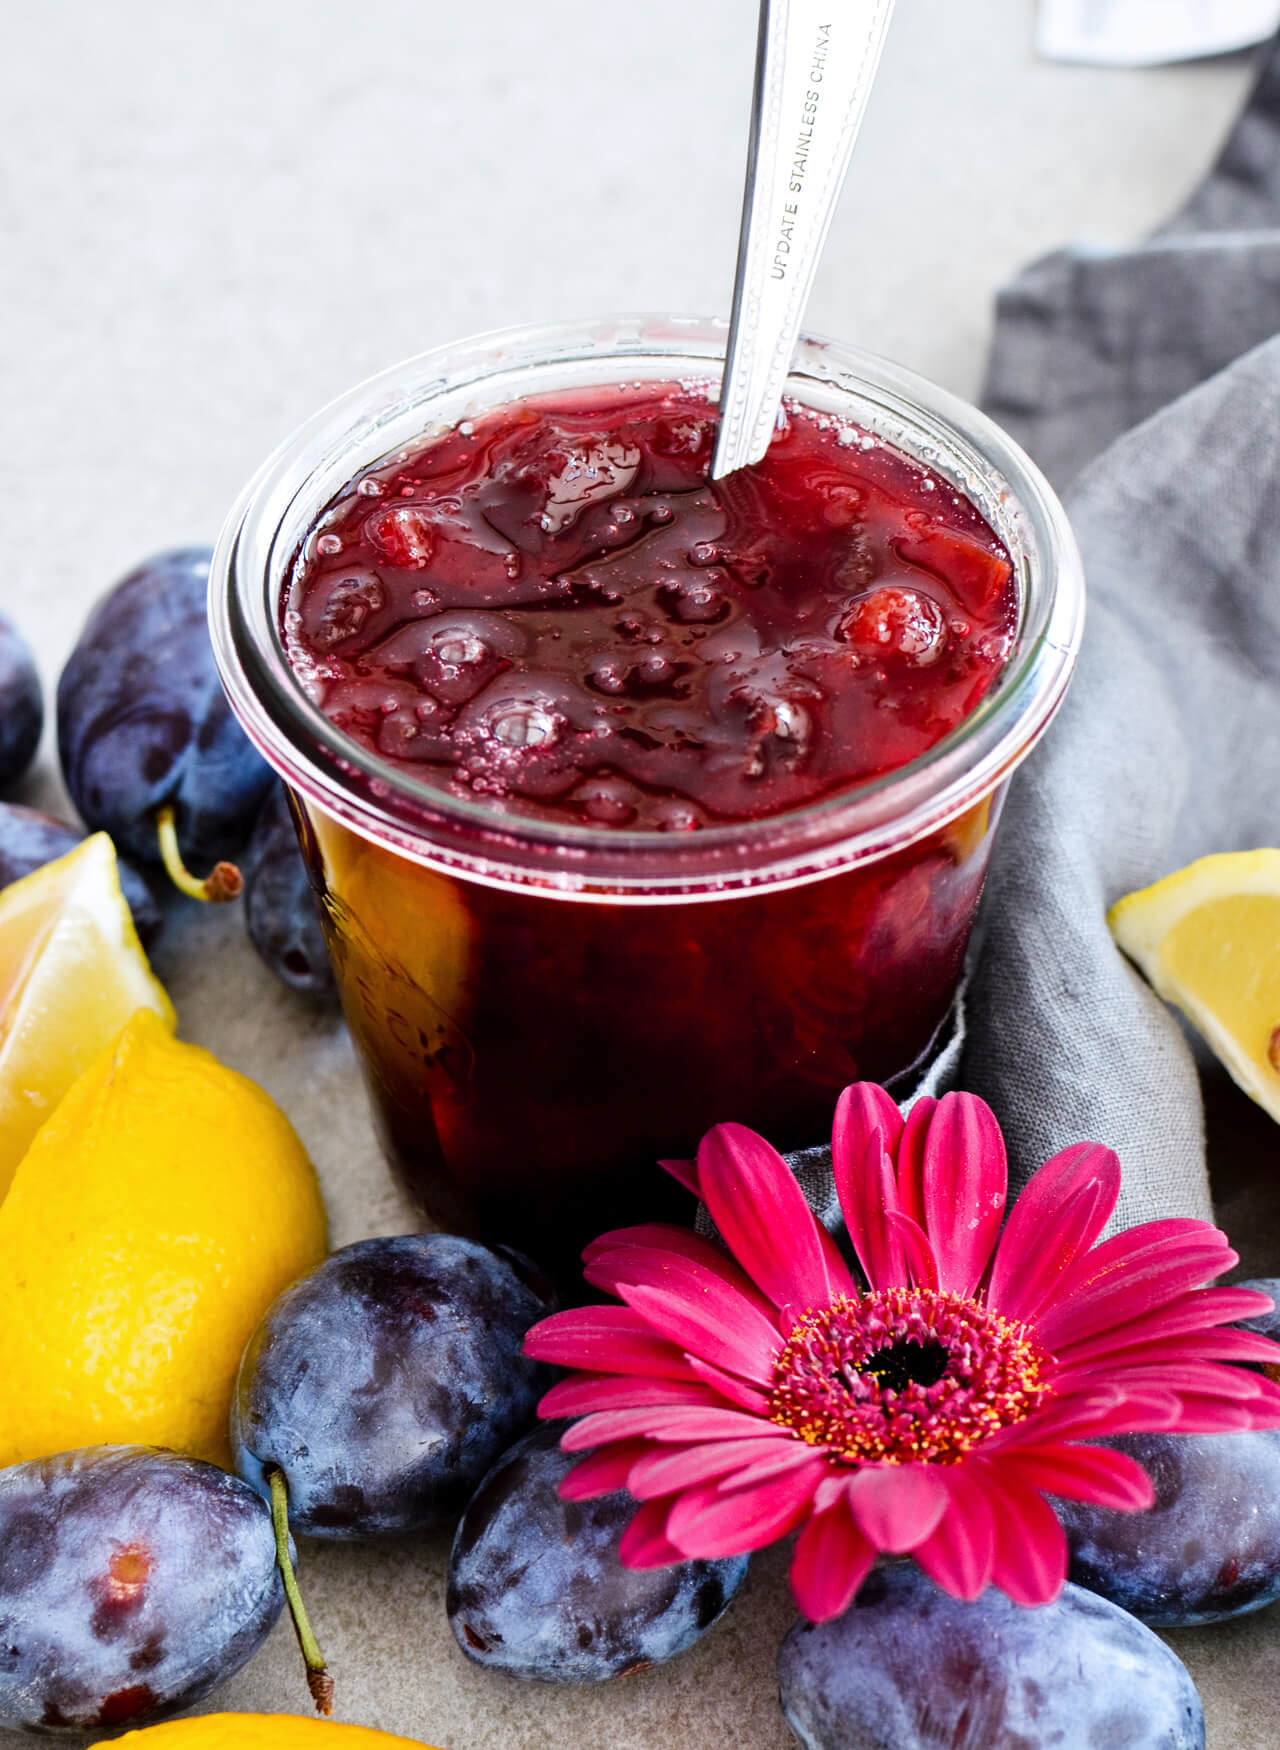 Recipe for small batch plum quick jam! The easiest way to make wonderful plum jam, that is great on bread, pancakes, yogurt, oatmeal and more.